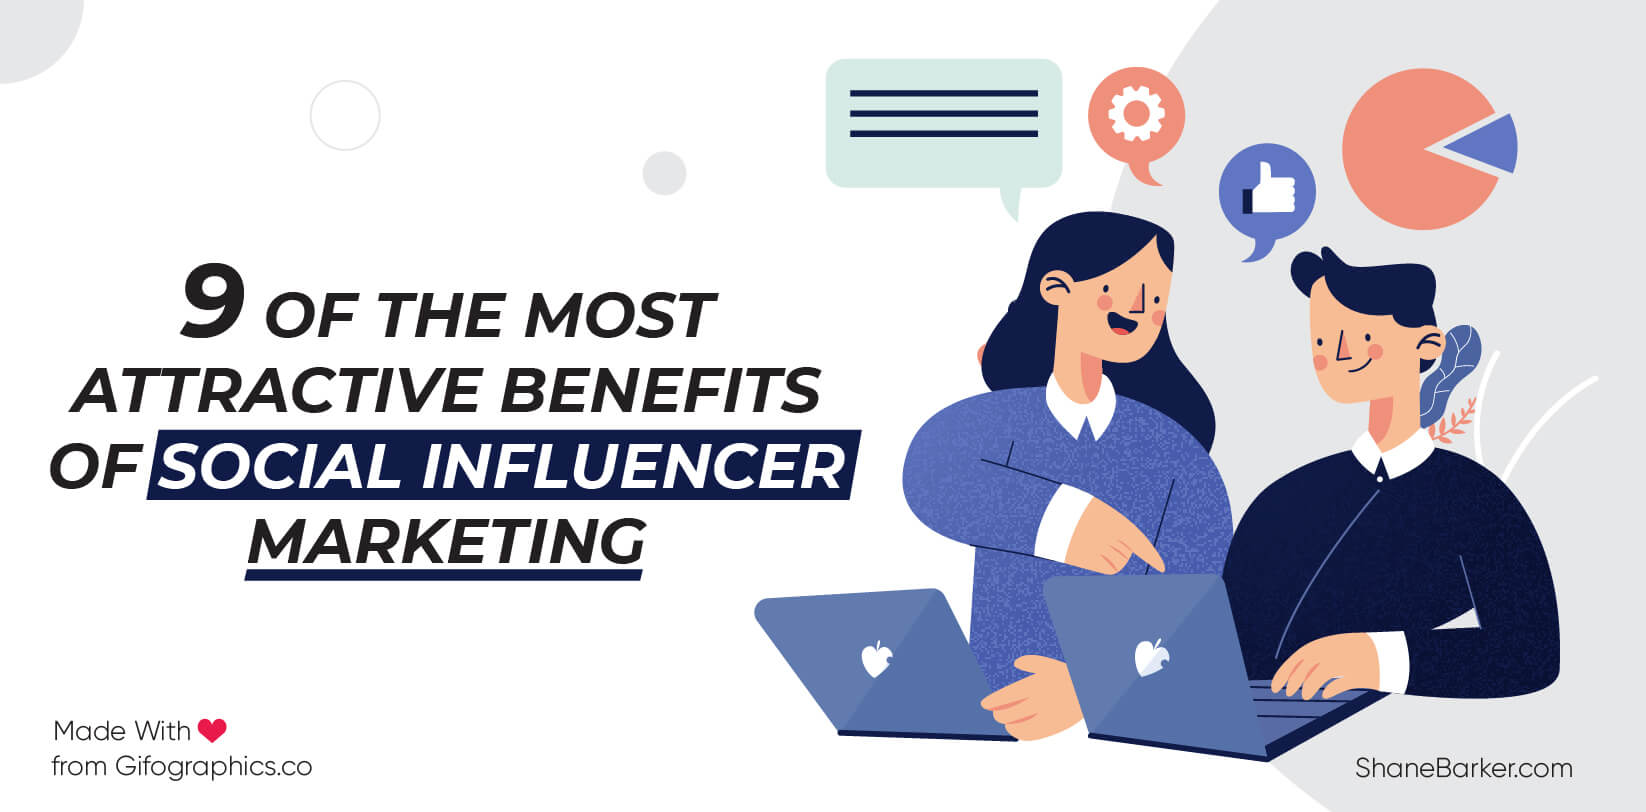 9 of the most attractive benefits of social influencer marketing